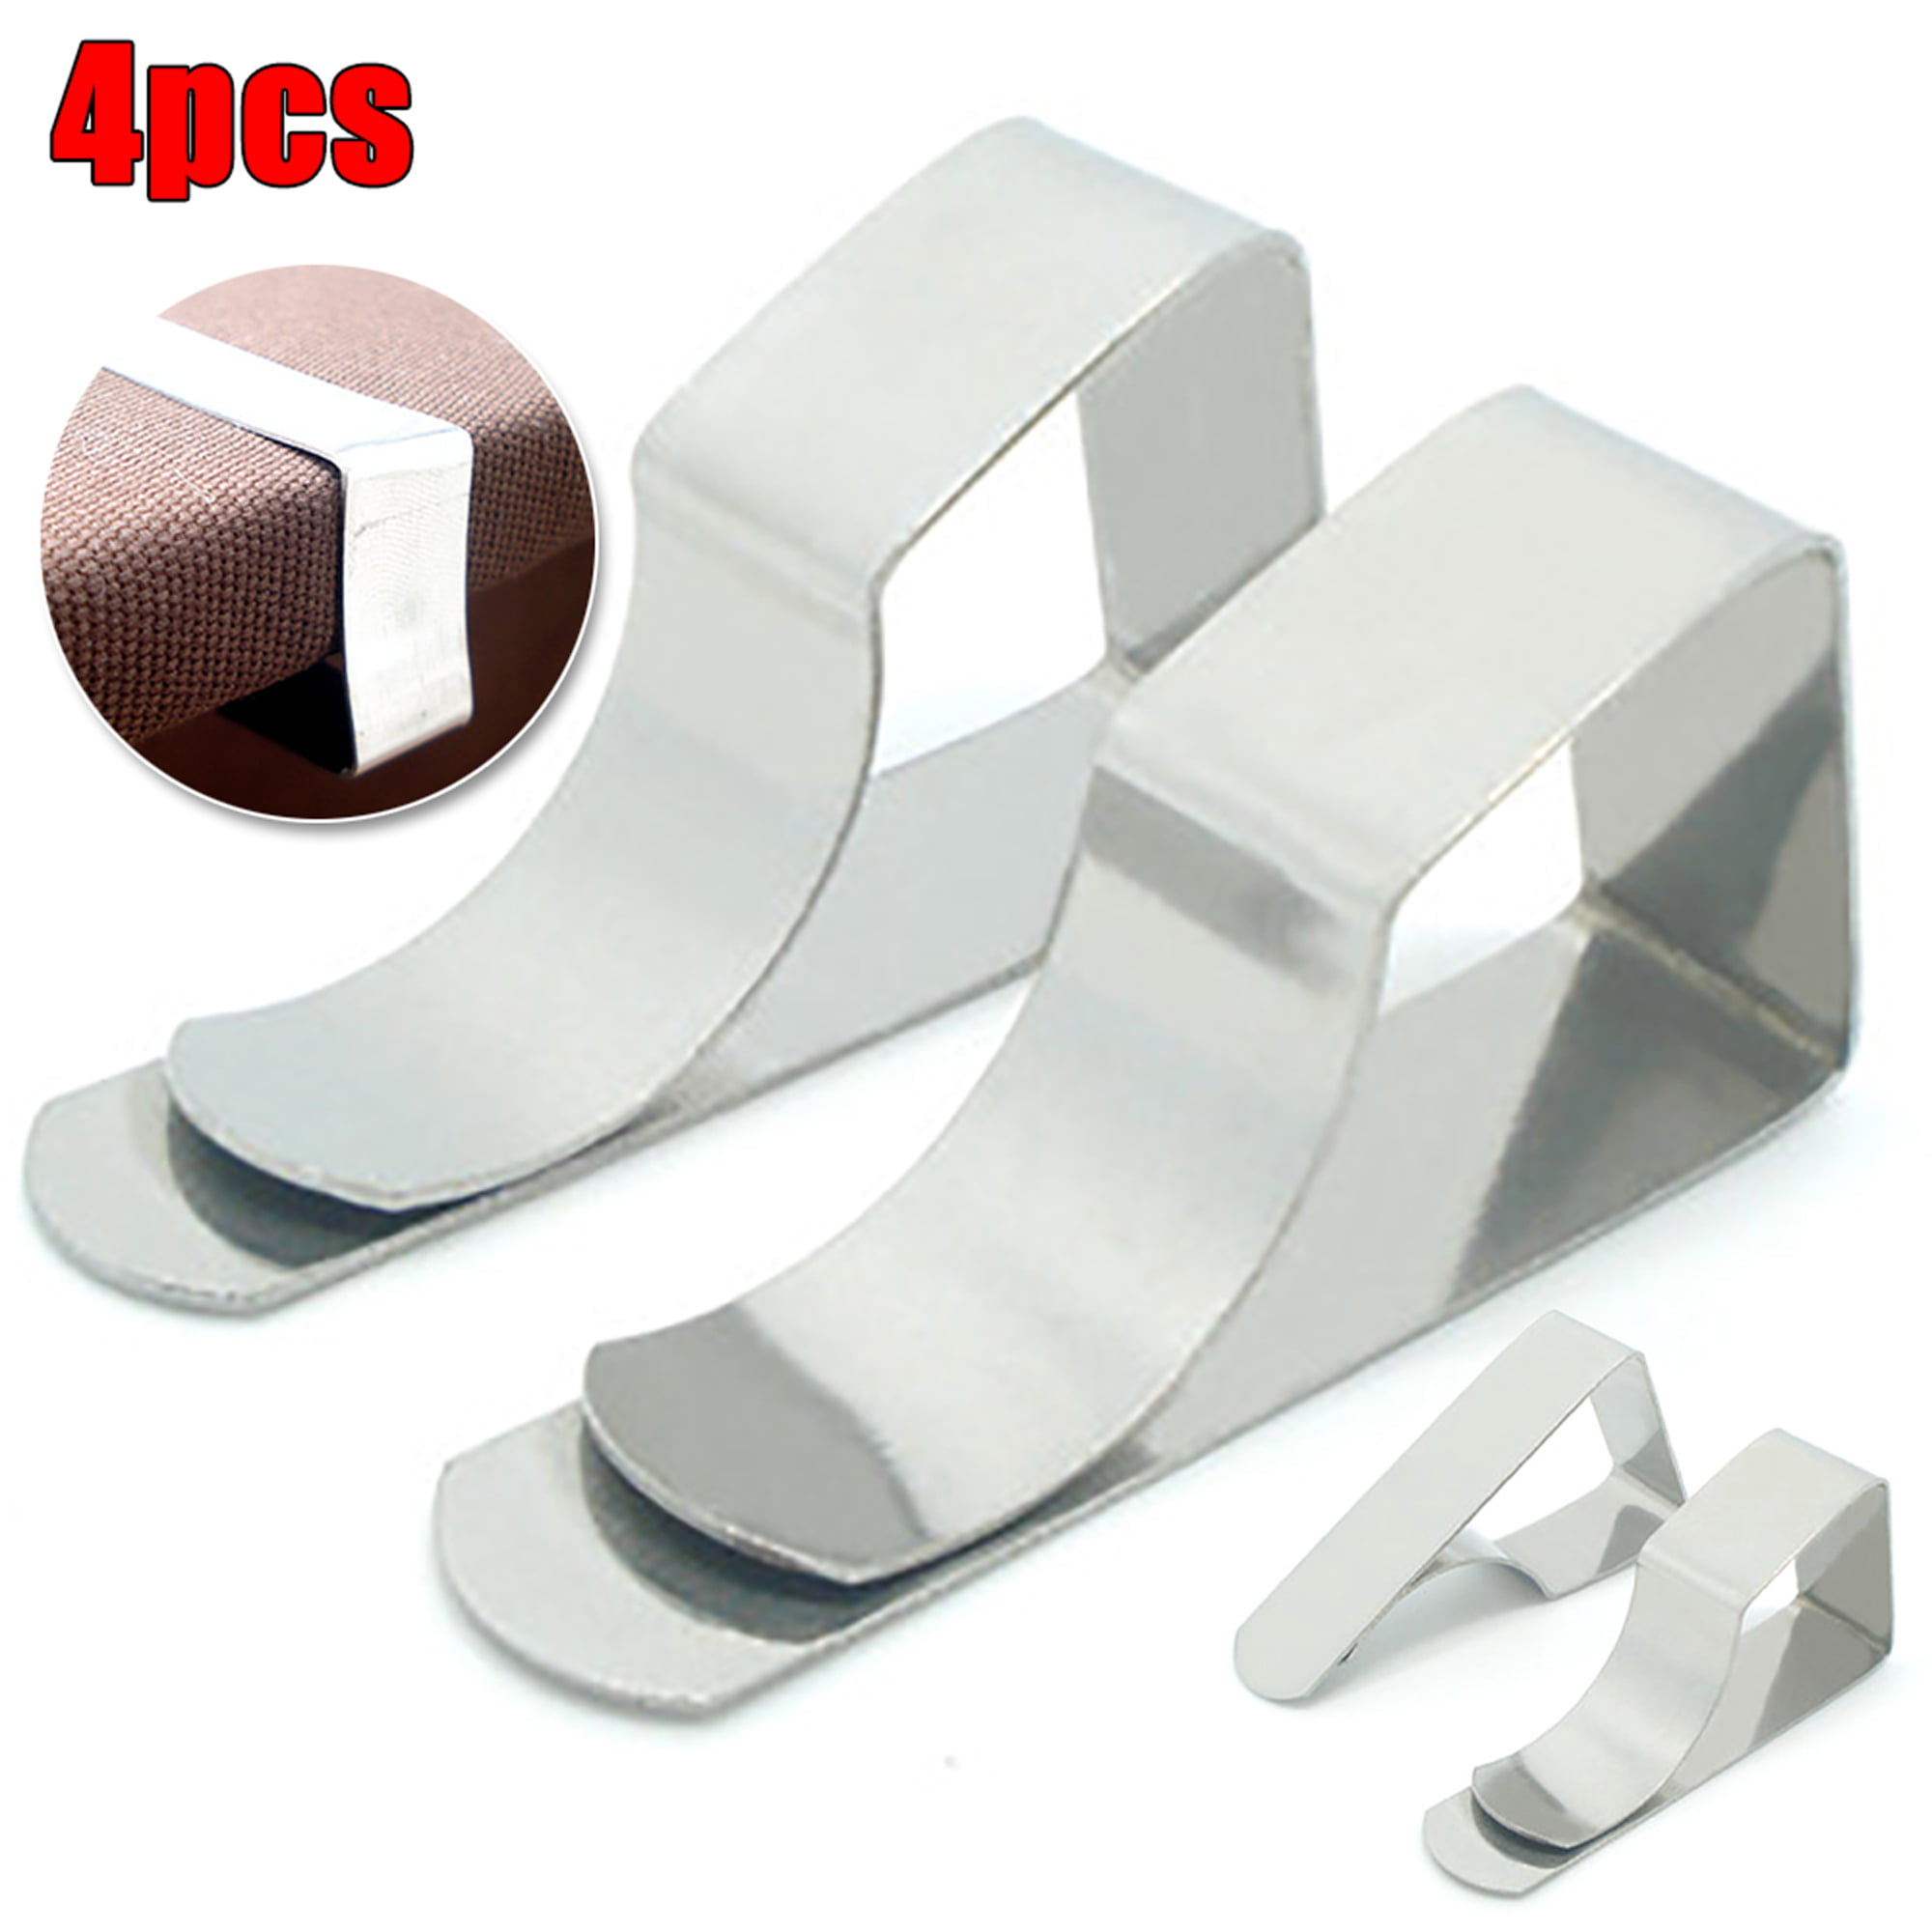 1//4//8//12 Stainless Steel Tablecloth Clips Desk Table Cloth Cover Clamps Holder